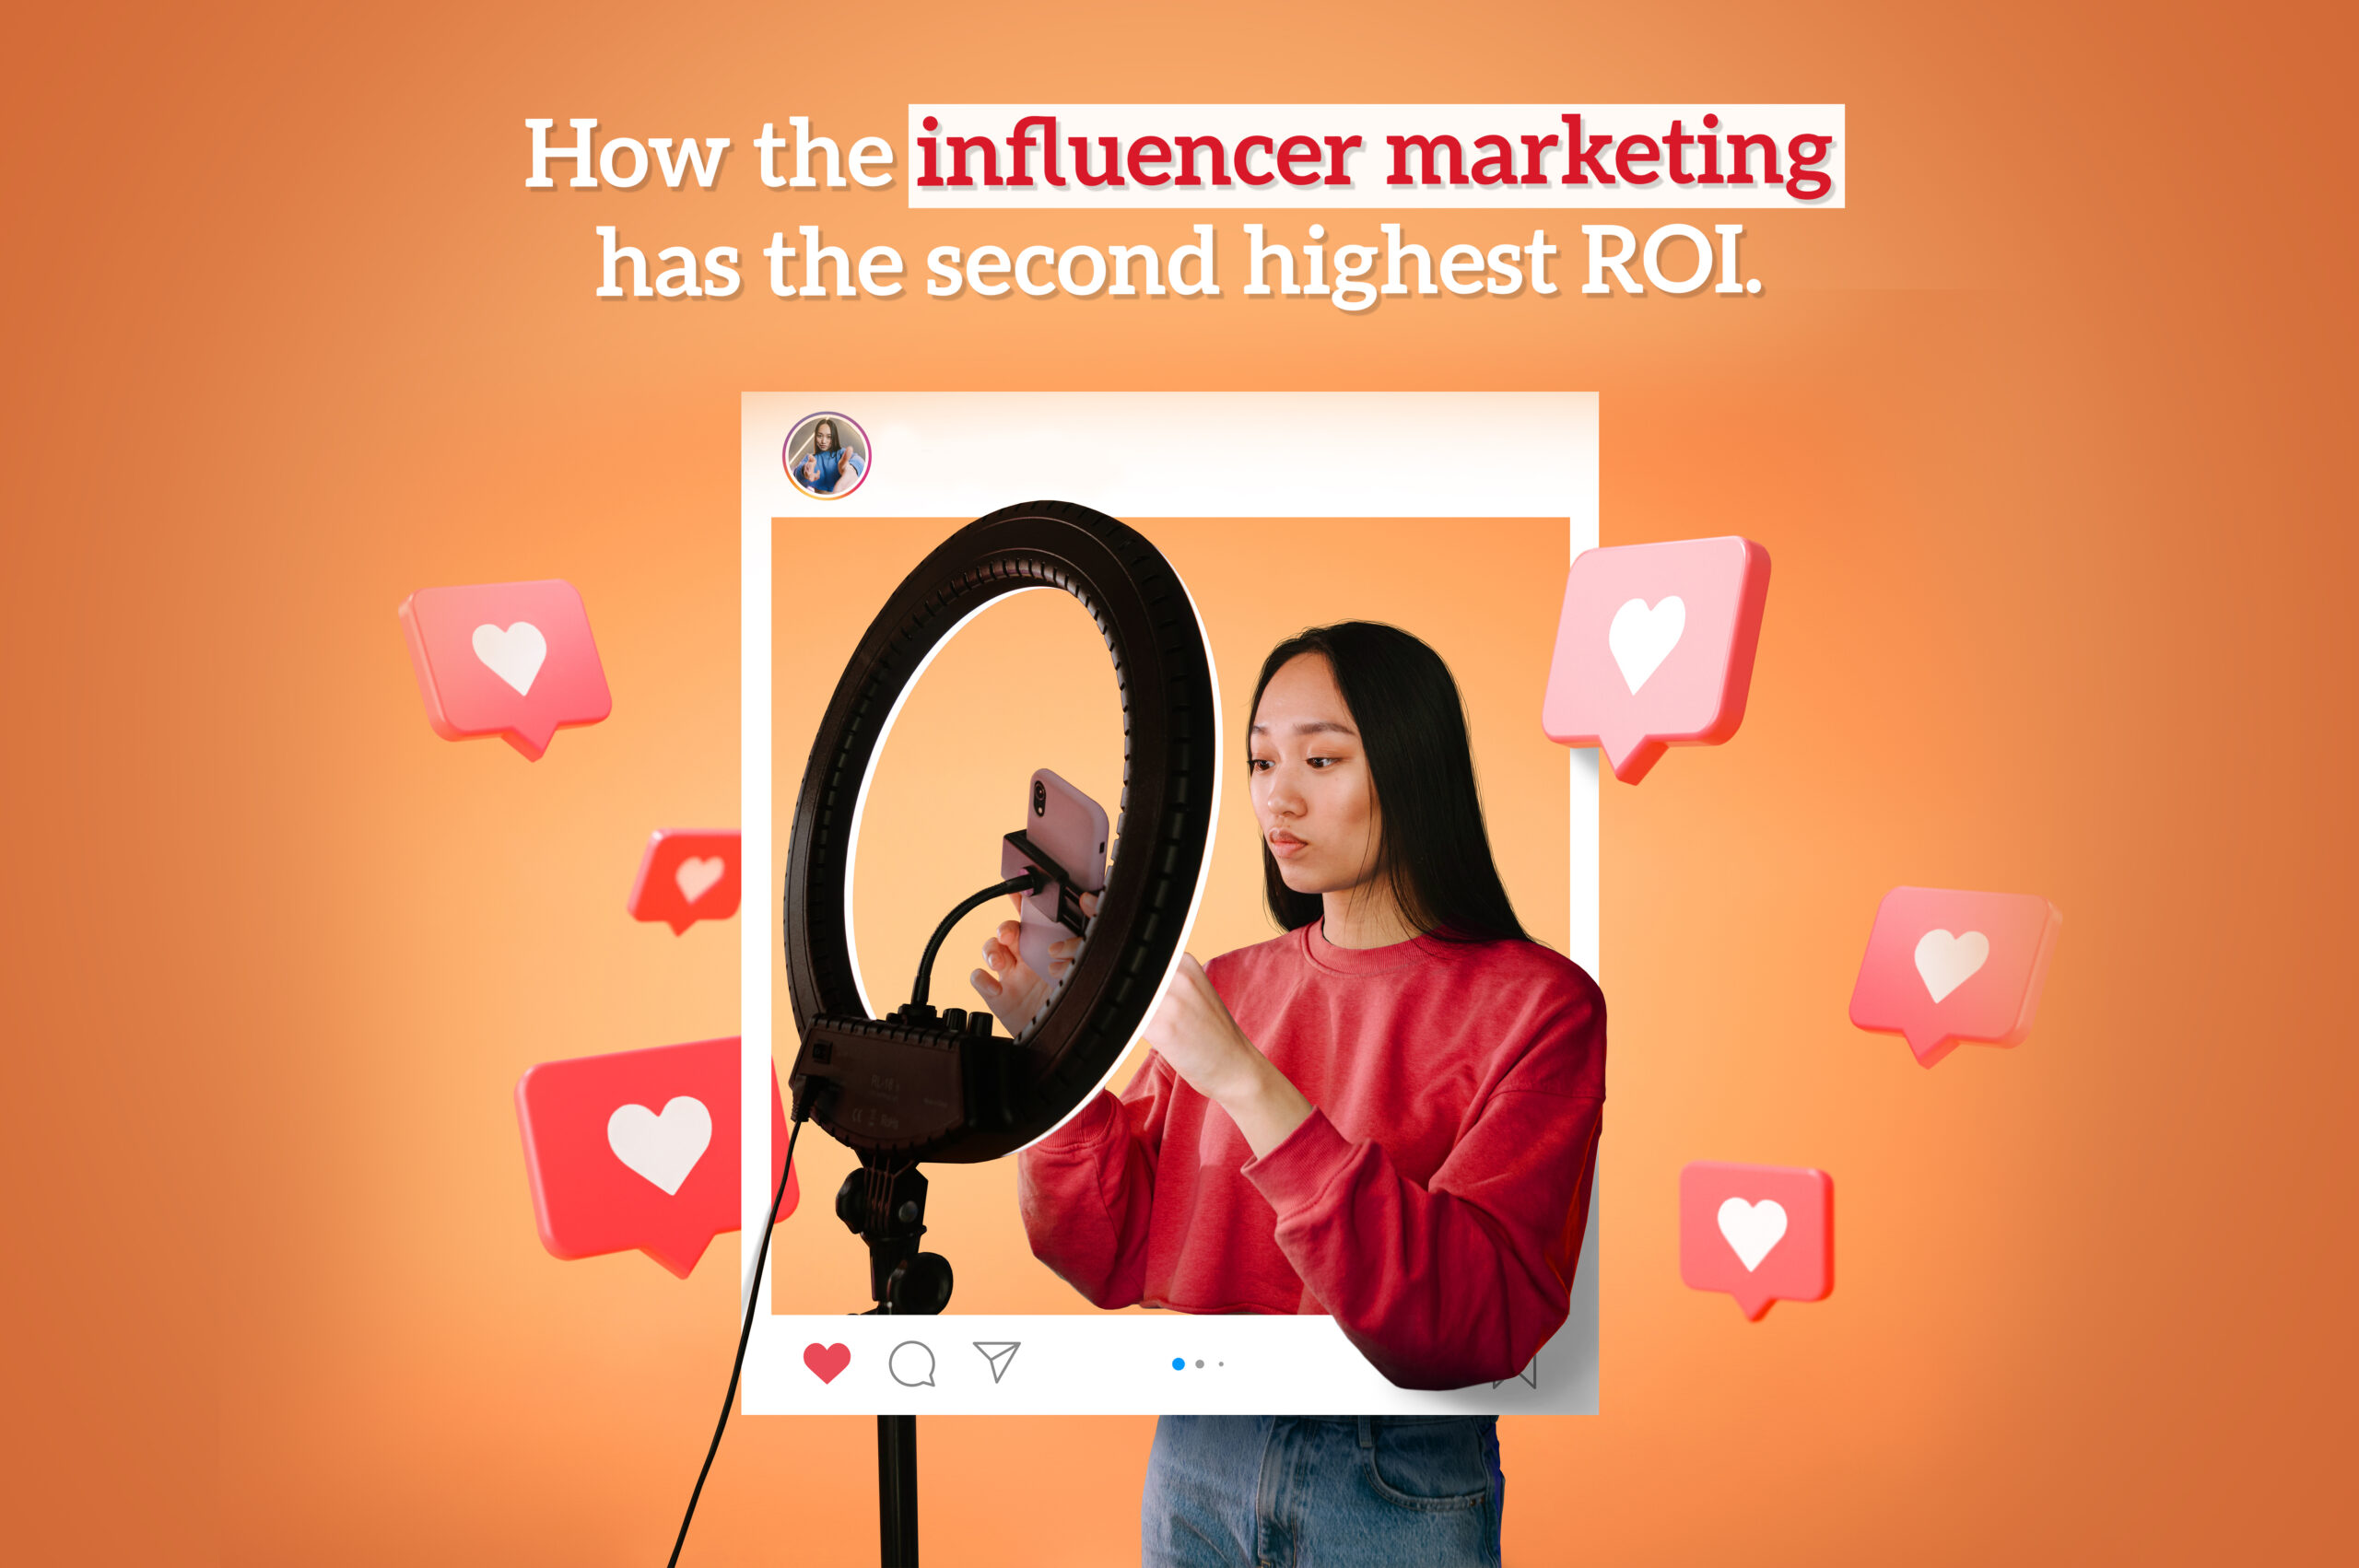 How the influencer marketing has the second highest ROI